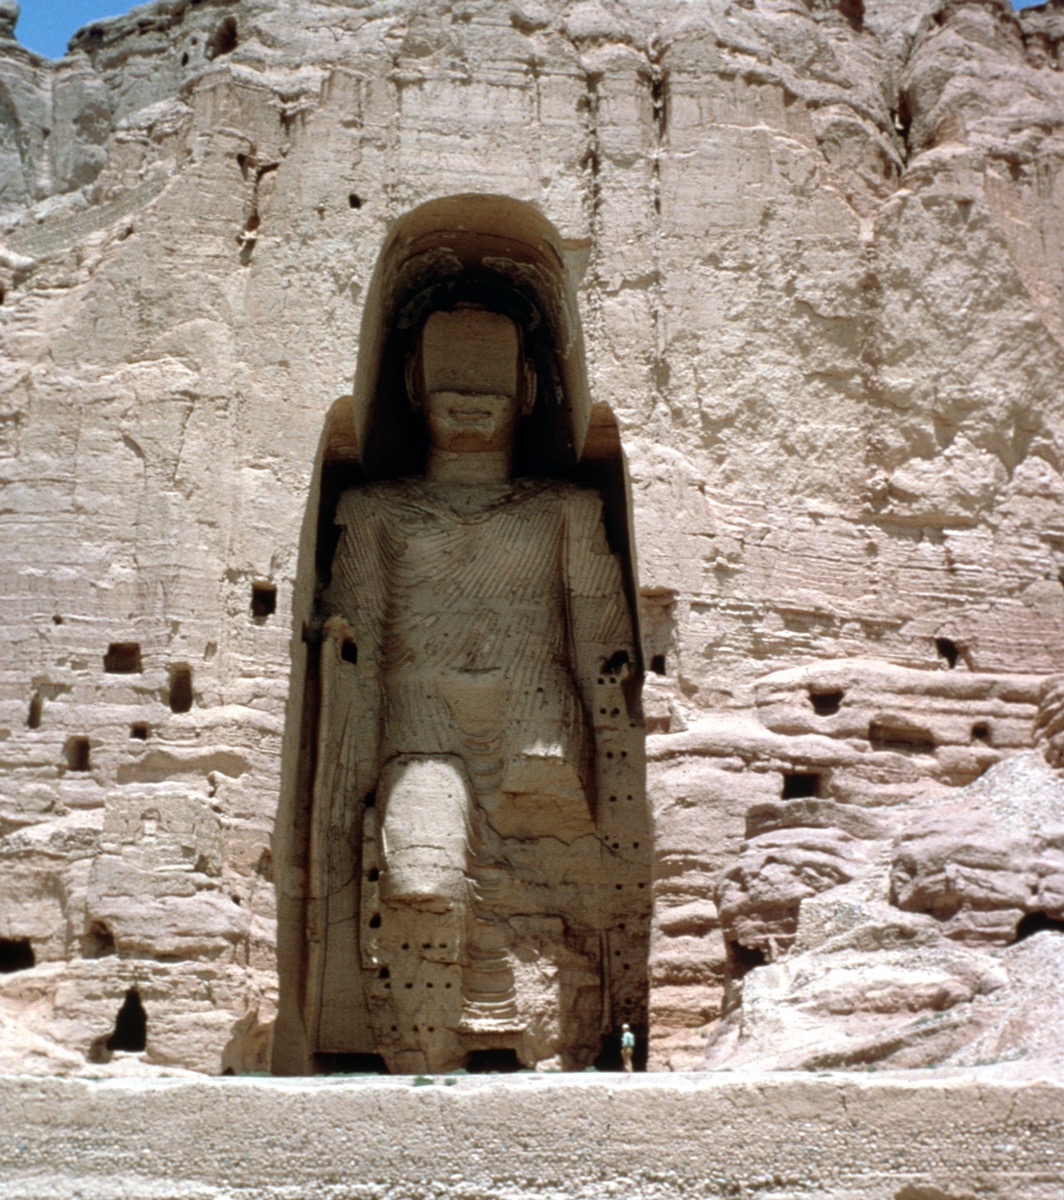 BT7C2C Afghanistan Bamiyan the Big Buddha, destroyed by the Taliban in 2001